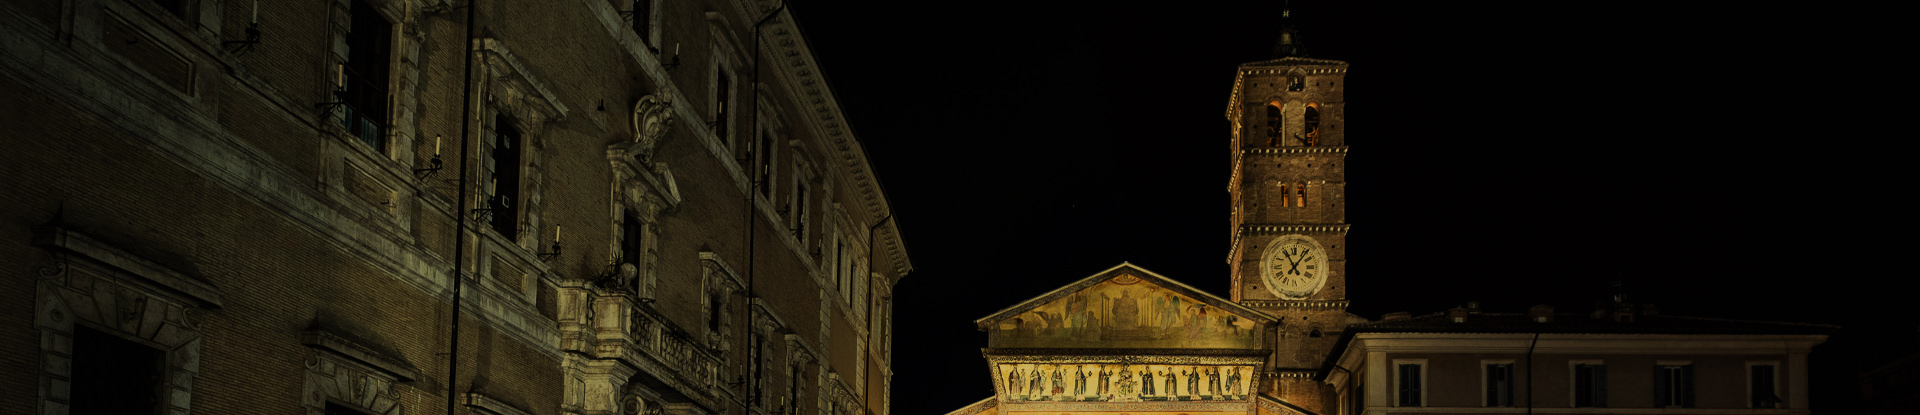 The new artistic lighting system of the Basilica of Santa Maria in Trastevere